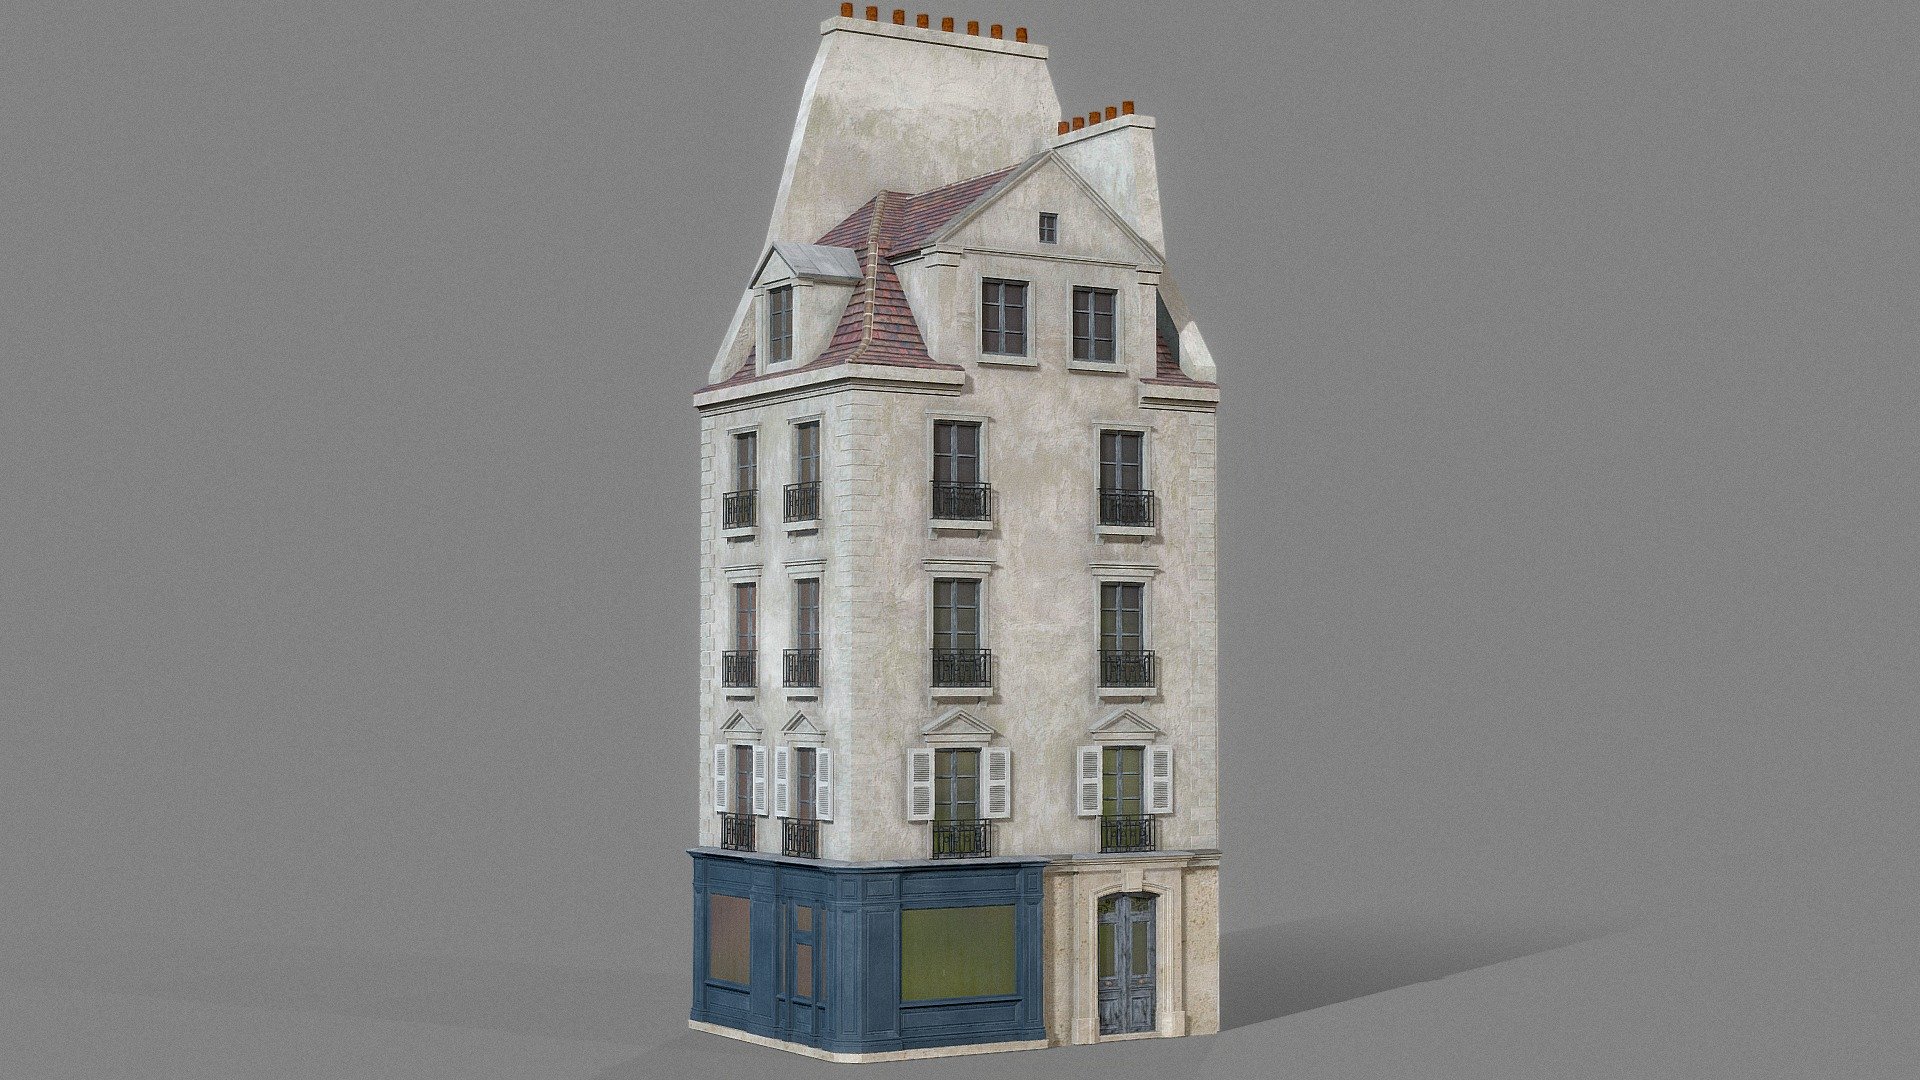 This is high quality 3d model of Paris apartment, highly detailed, ready for real time application.
The model uses 2 materials with 2k diffuse, specular and normal maps 3d model